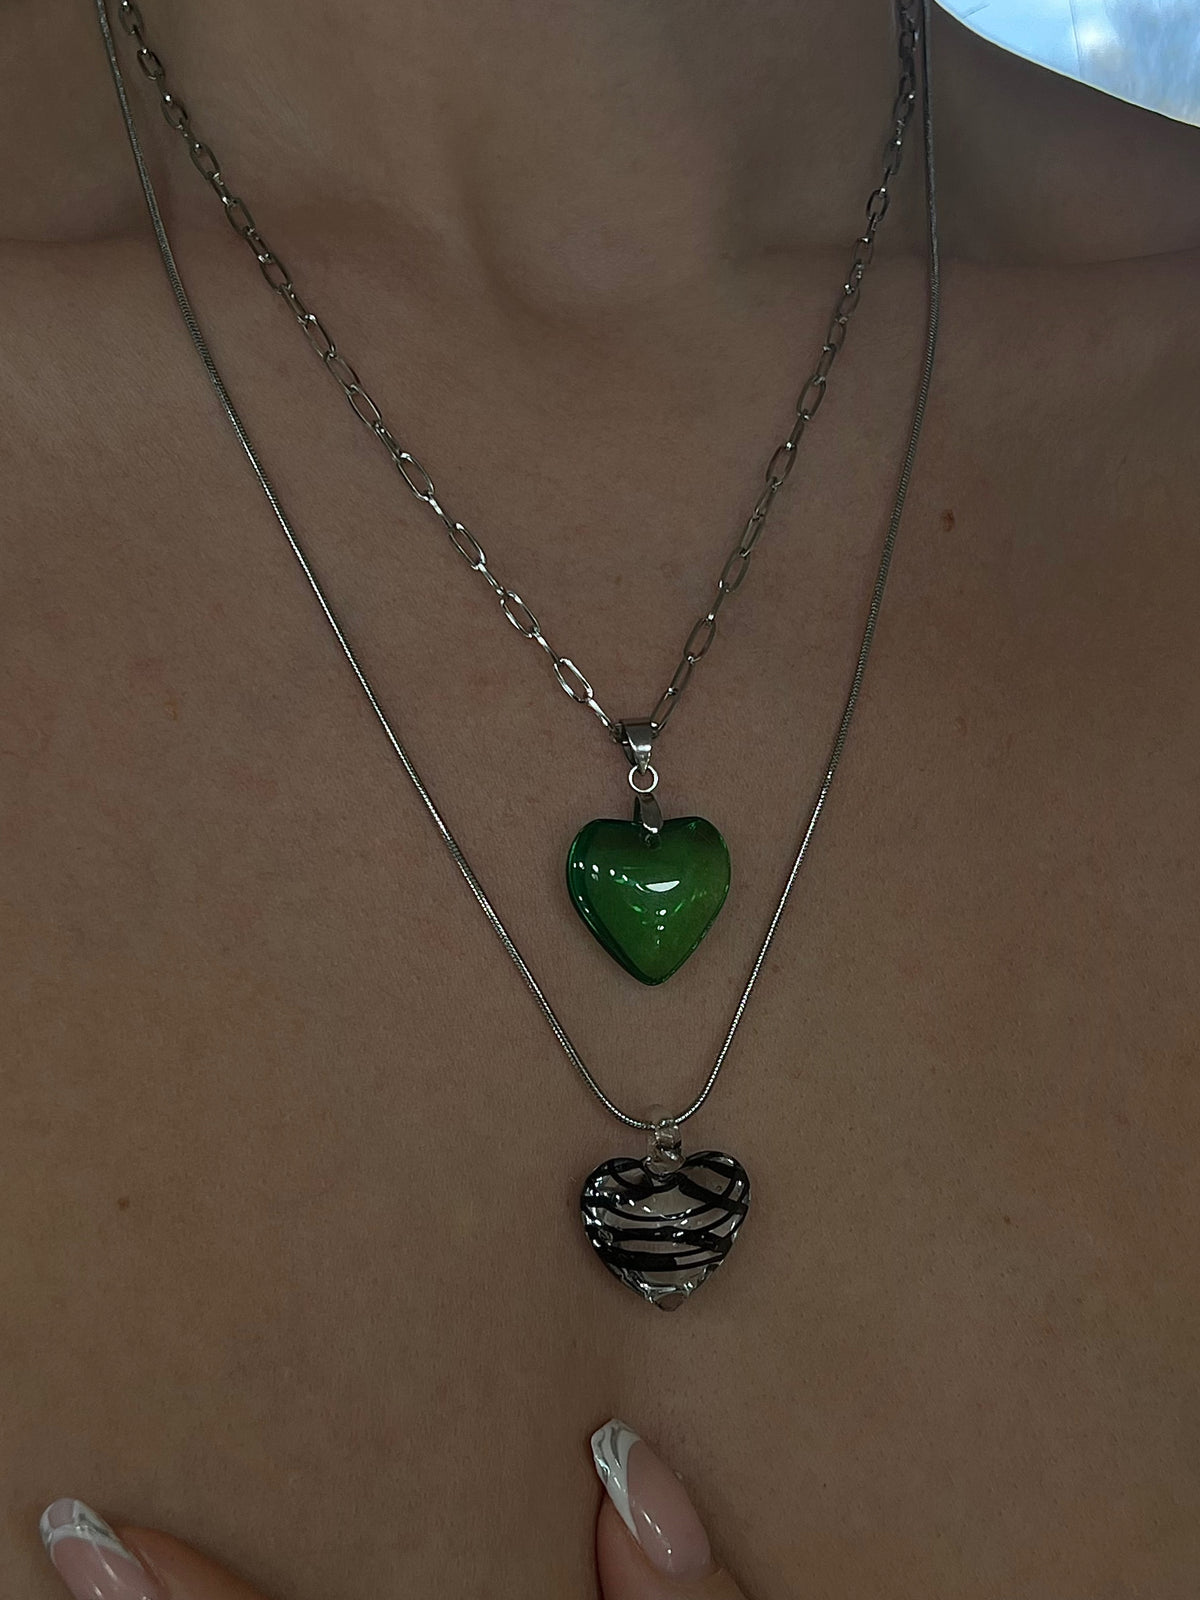 Jelly heart necklace